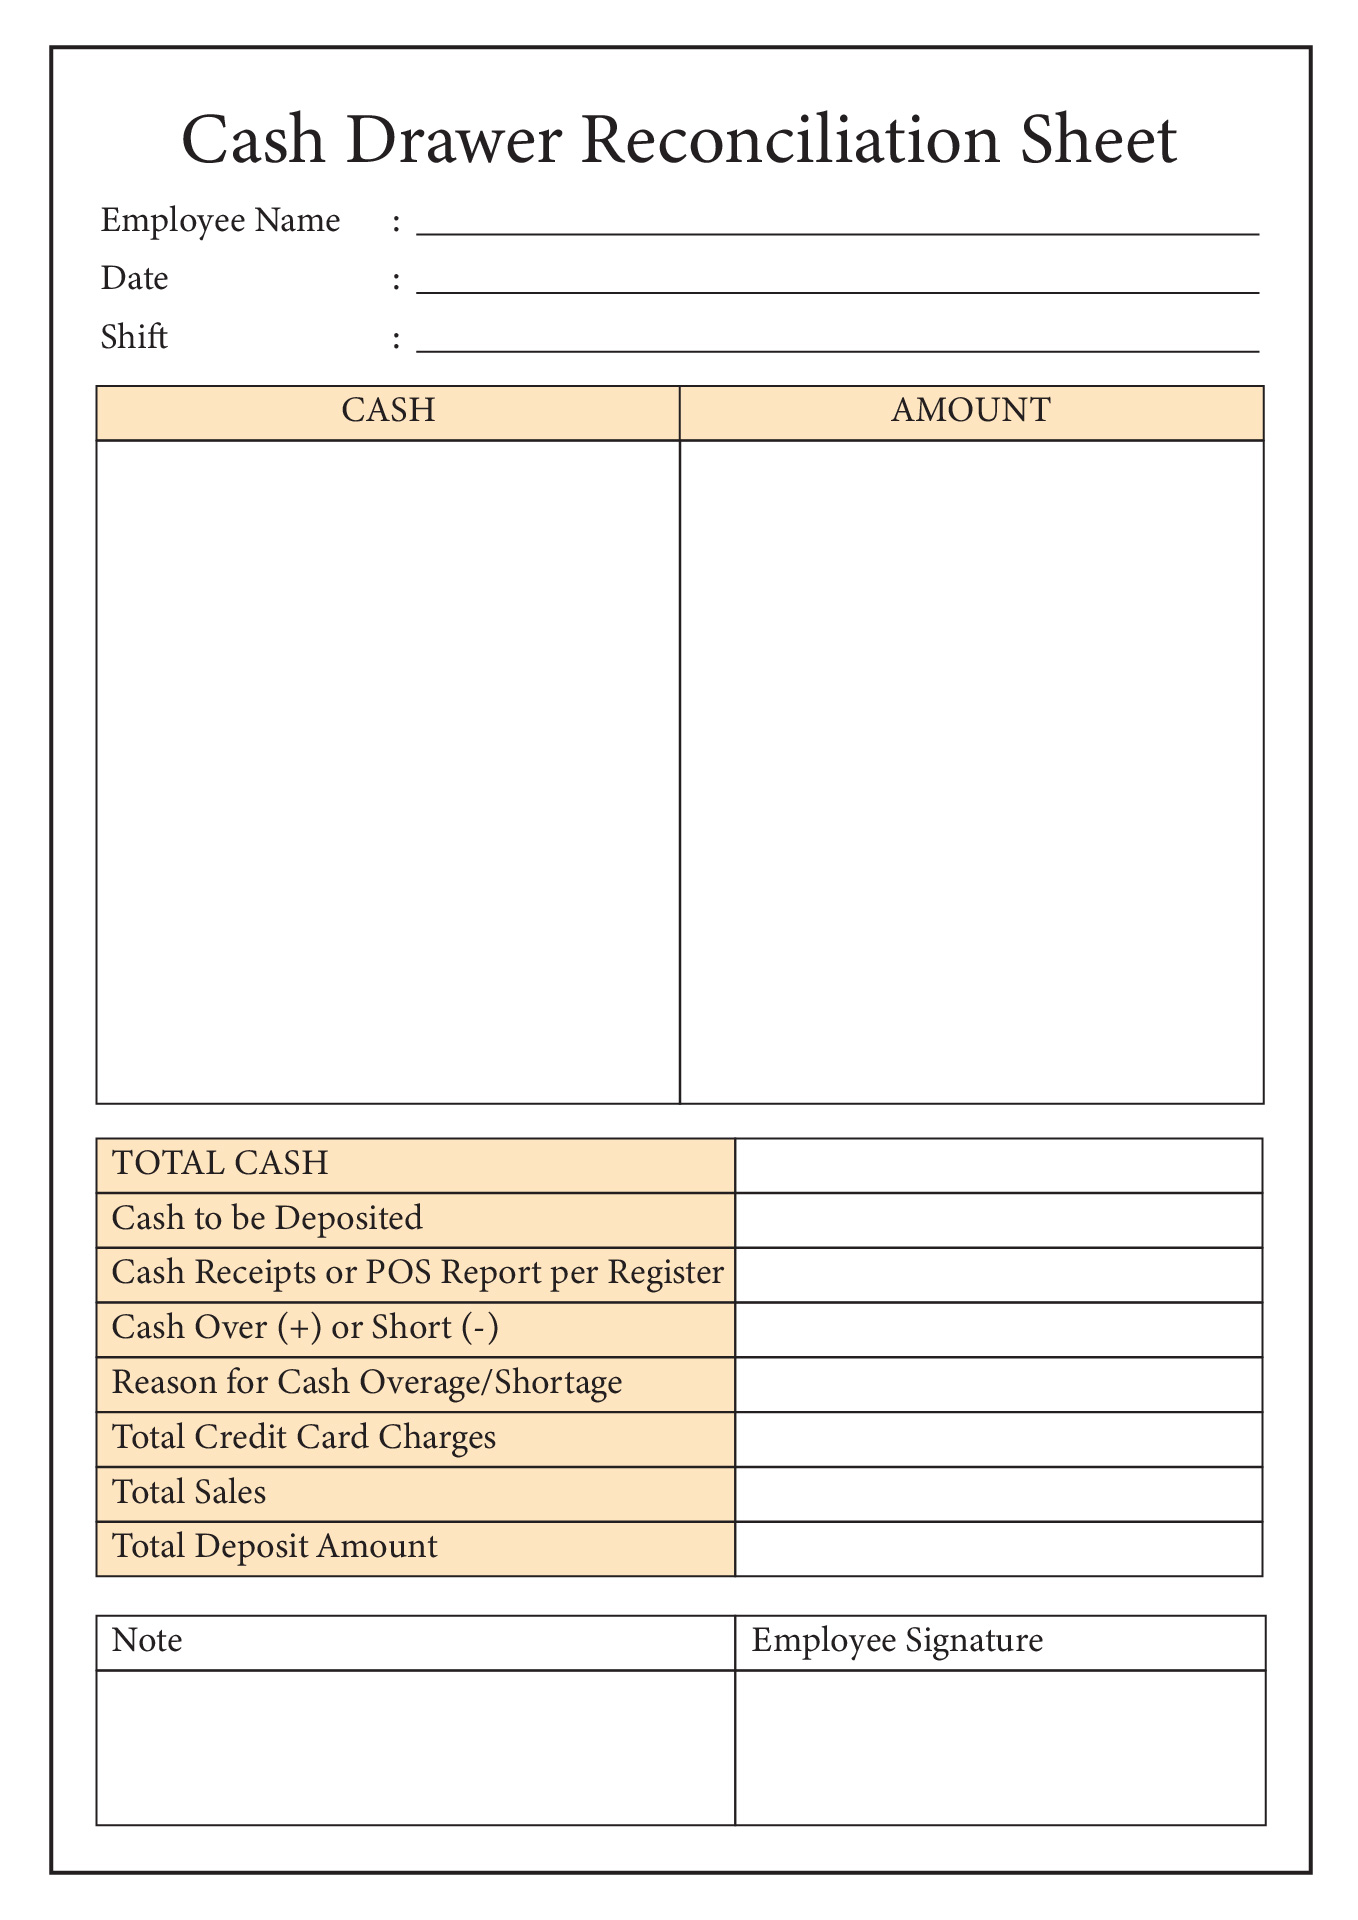 Daily Cash Reconciliation Worksheet Cash Drawer Count Sheet Excel